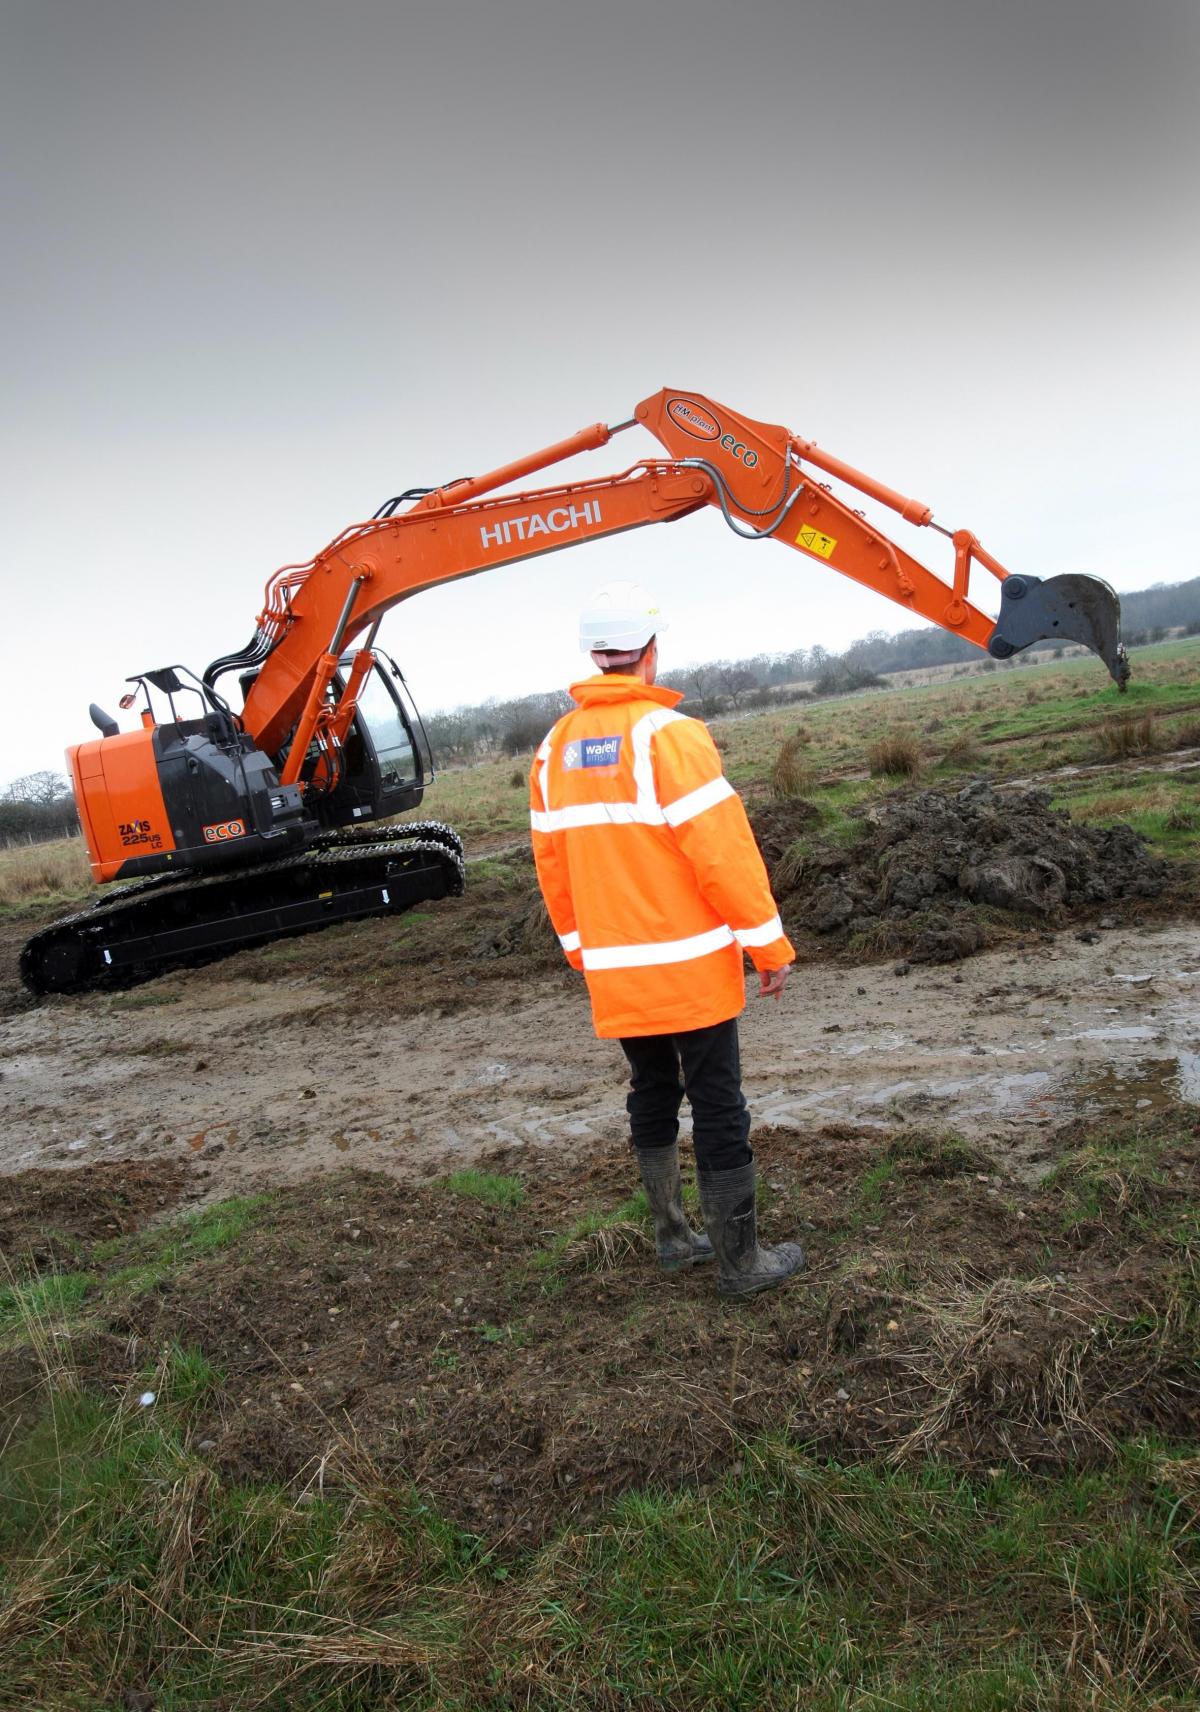 April 26, 2013: Martin Railton, a project manager from Wardell Armstrong Archaeology, watches as a digger moves the first earth on the site of the Hitachi train factory in Newton Aycliffe.